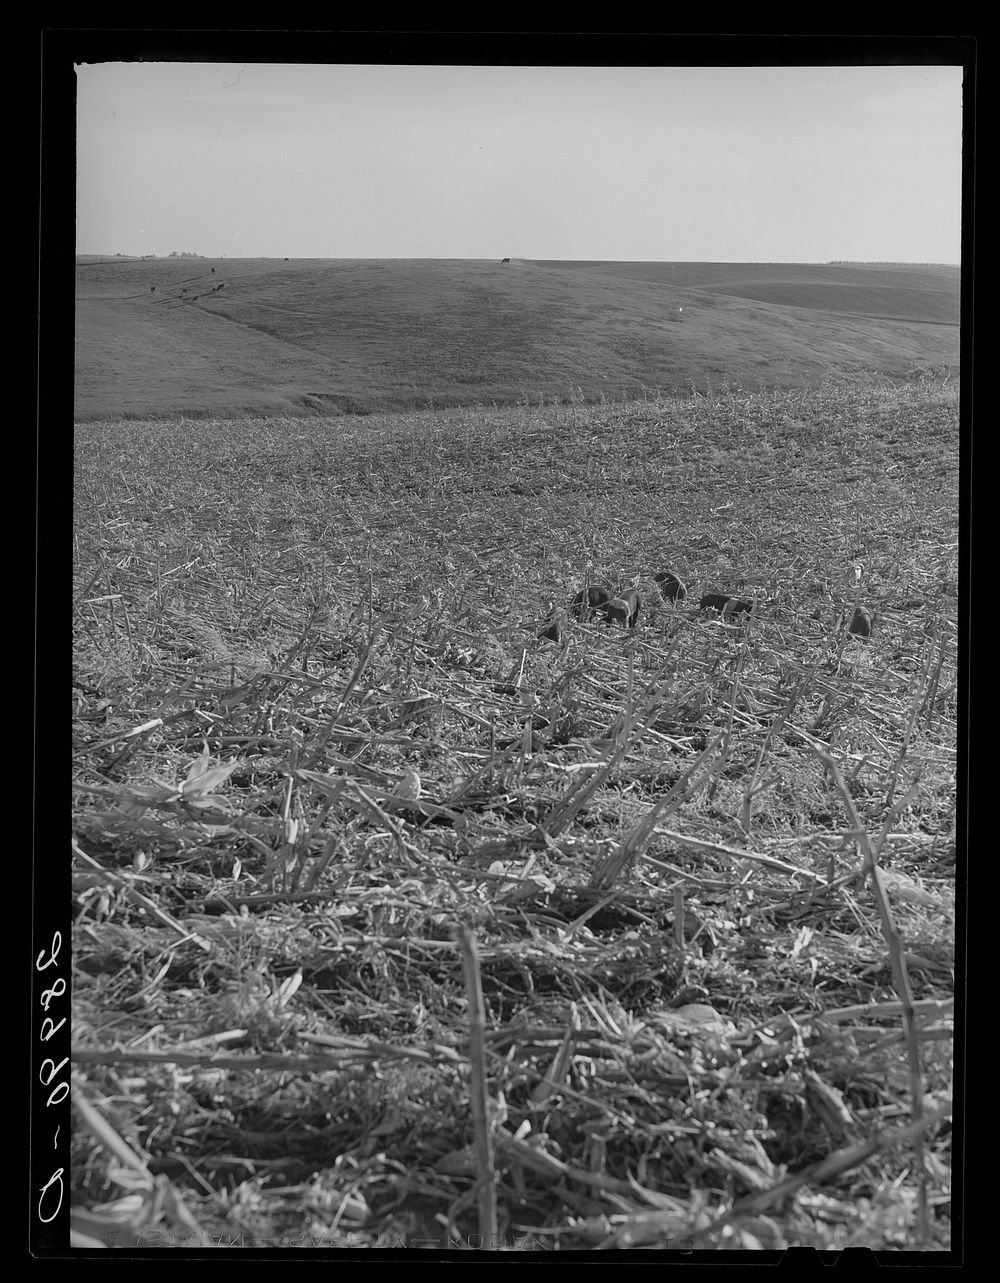 [Untitled photo, possibly related to: Hogs eat corn left in field by mechanical corn picker. Marshall County, Iowa]. Sourced…